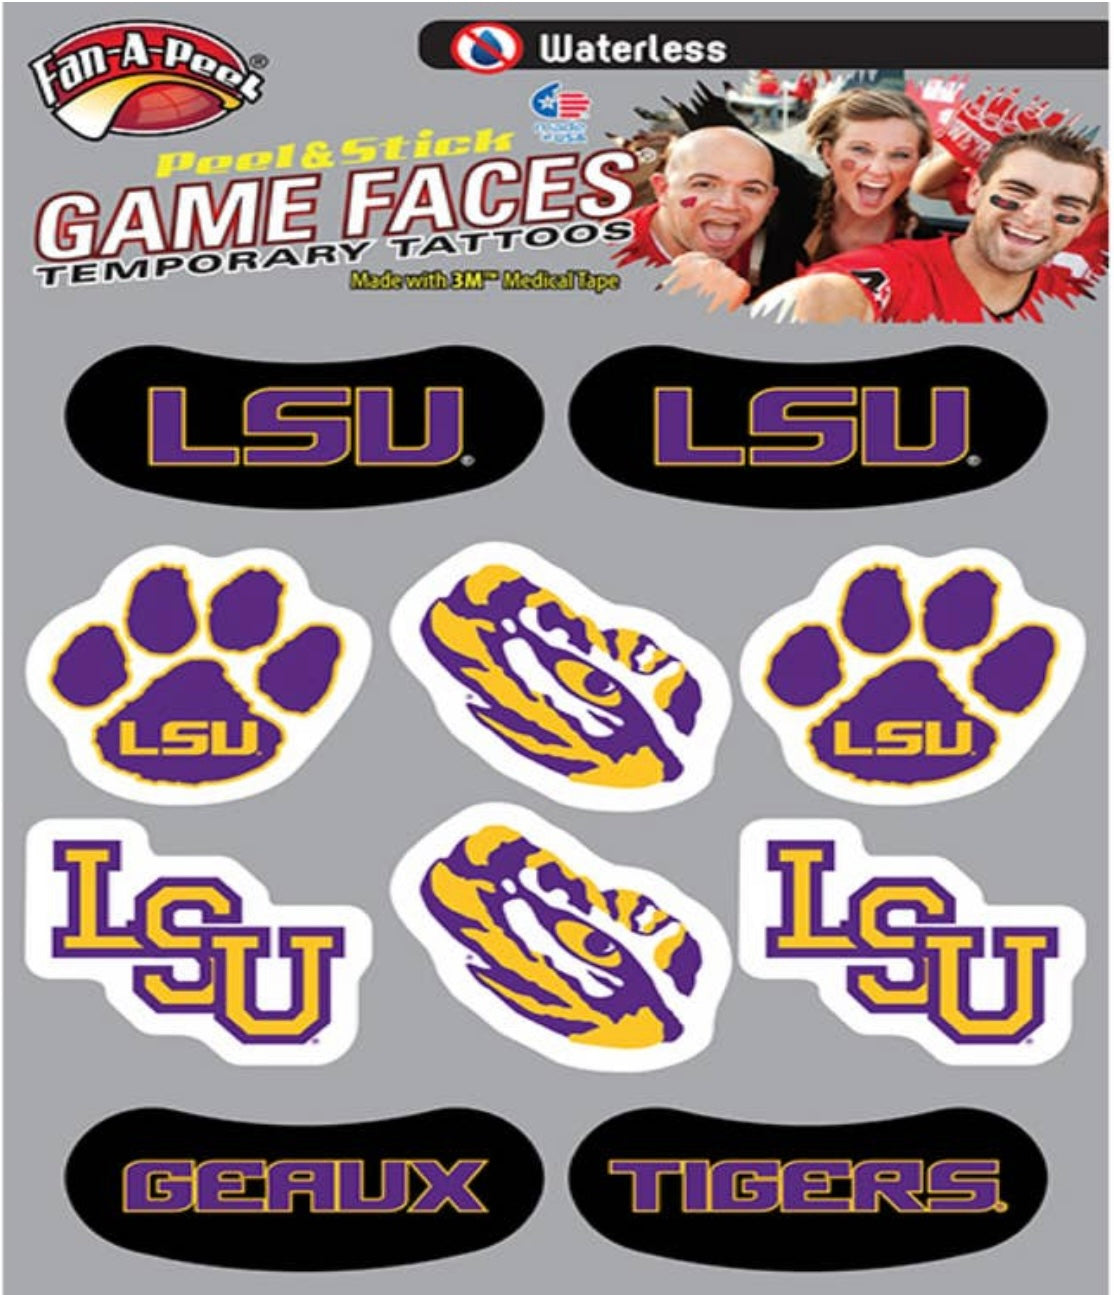 LSU Game Faces Temporary Tattoos